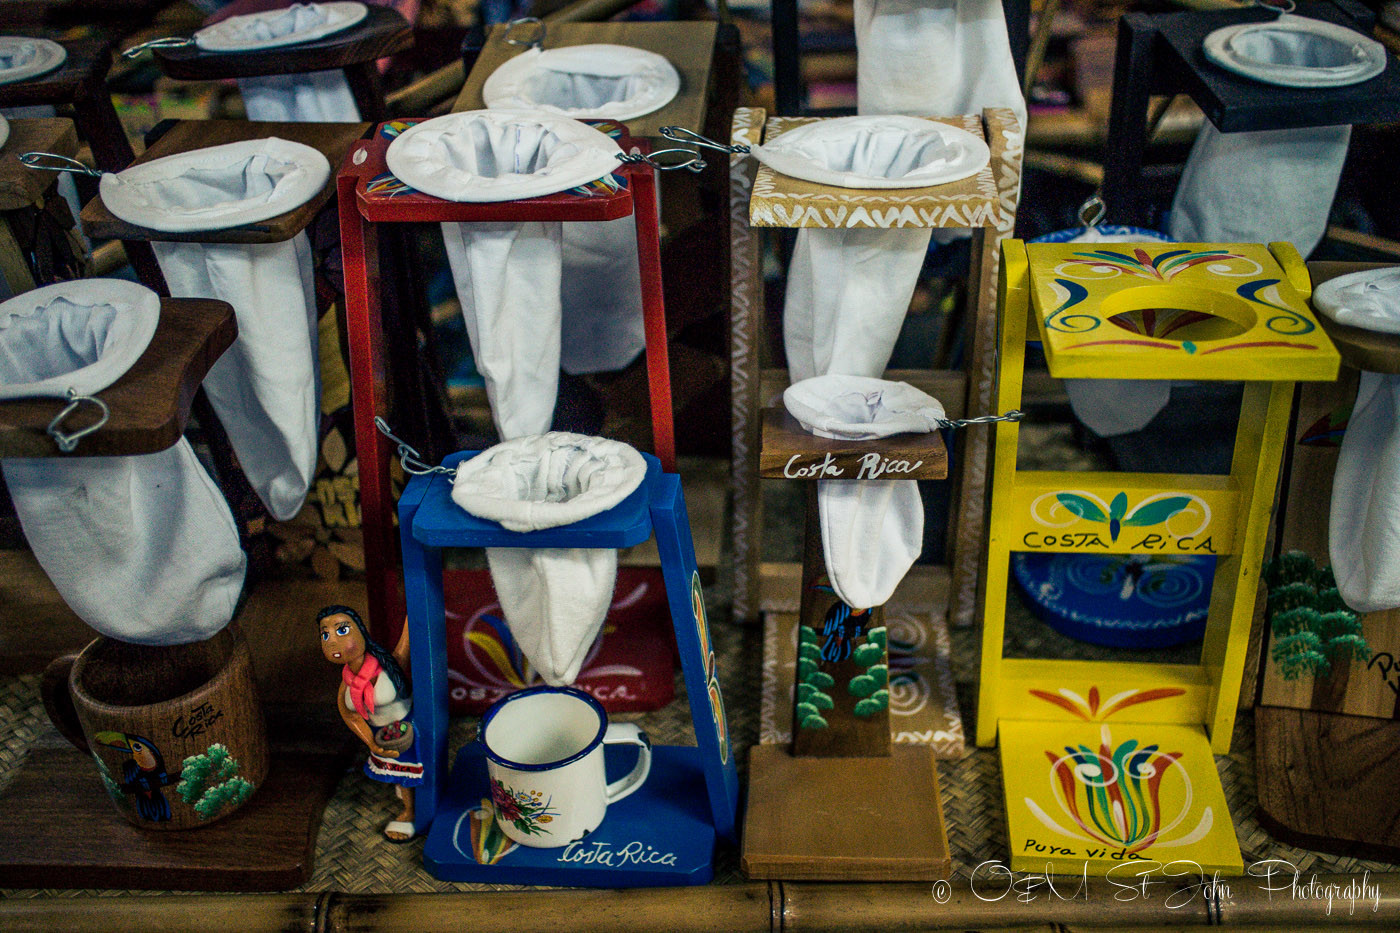 Costa Rica's famous sock coffee filter. Makes the best coffee, supposedly!